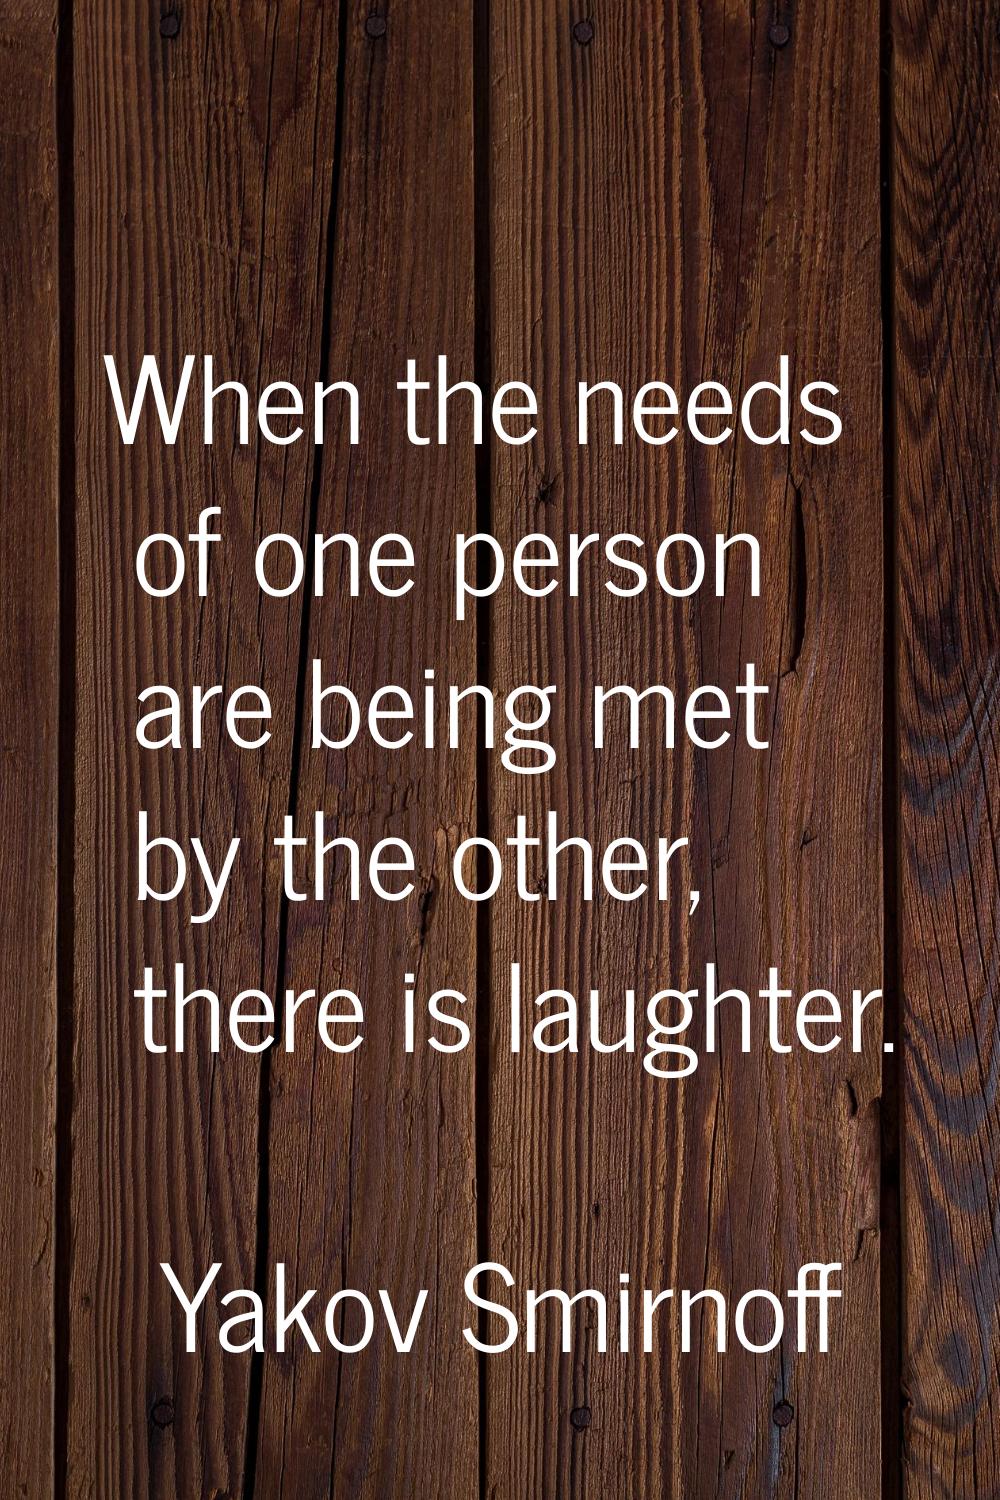 When the needs of one person are being met by the other, there is laughter.